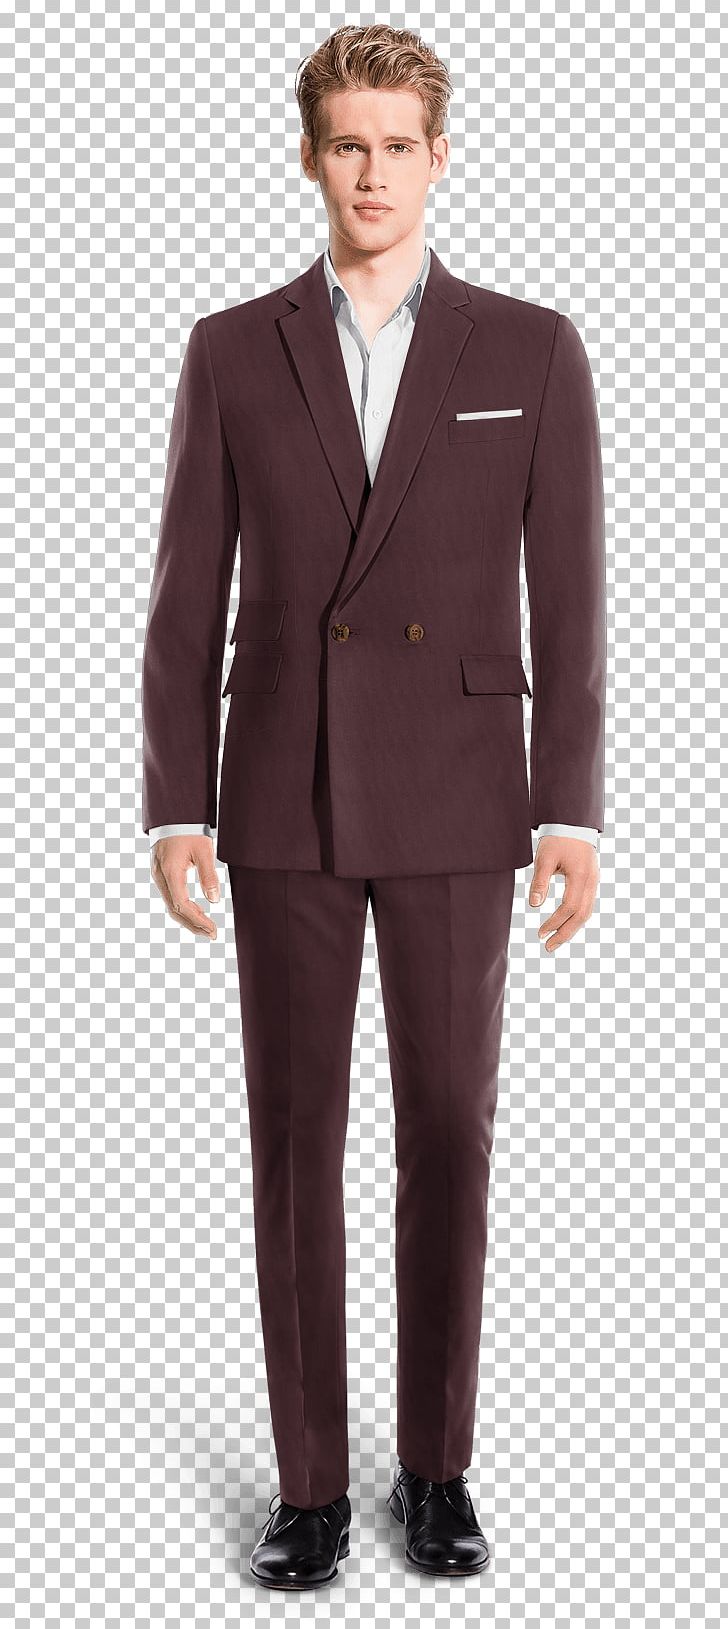 Tuxedo Suit Blue Pants Jacket PNG, Clipart, Blazer, Blue, Businessperson, Button, Chino Cloth Free PNG Download